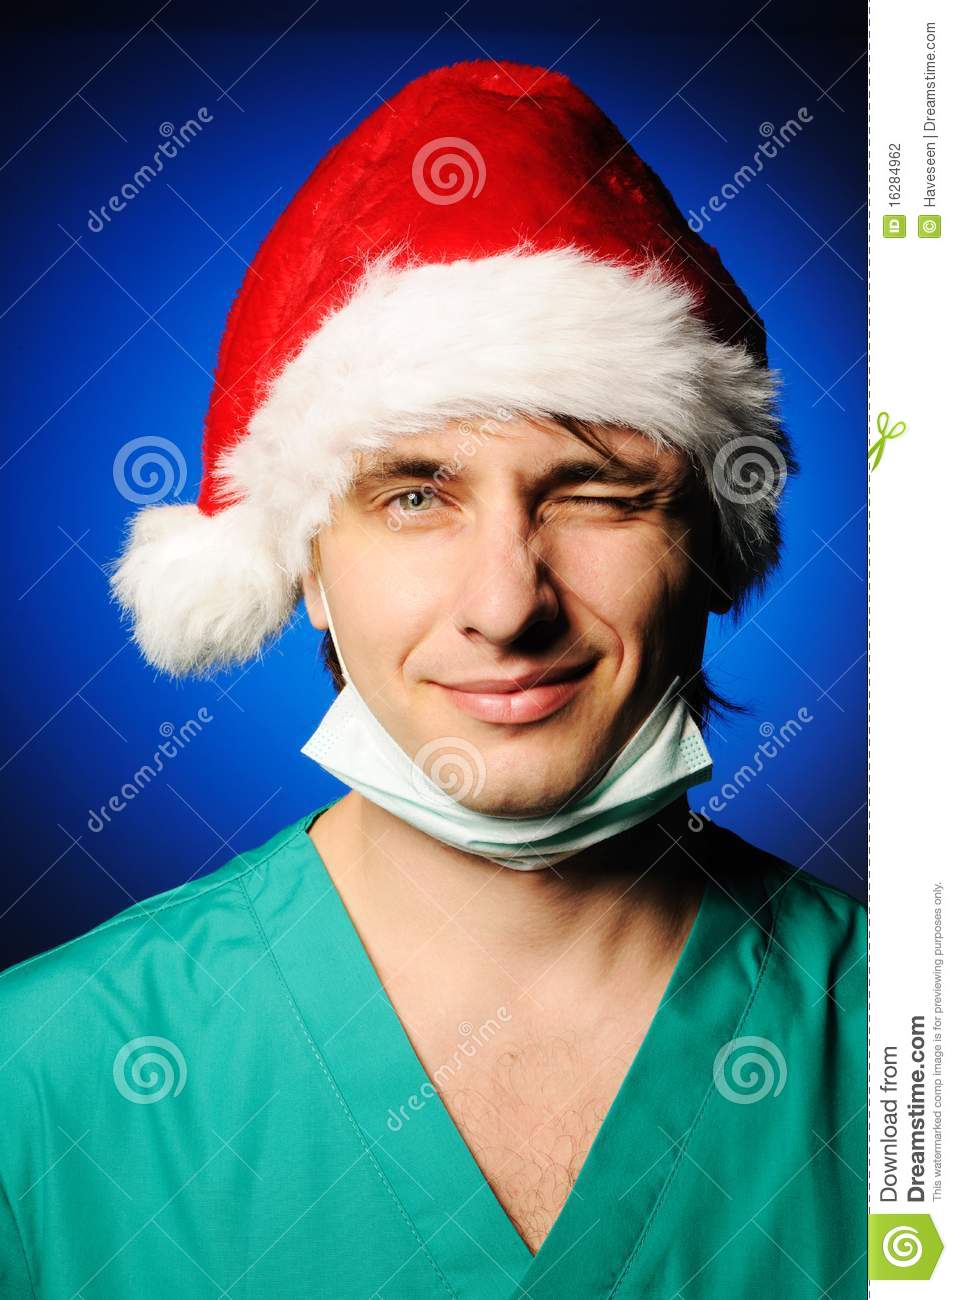 Surgeon With Mask In Santa S Hat Smiling And Winking 